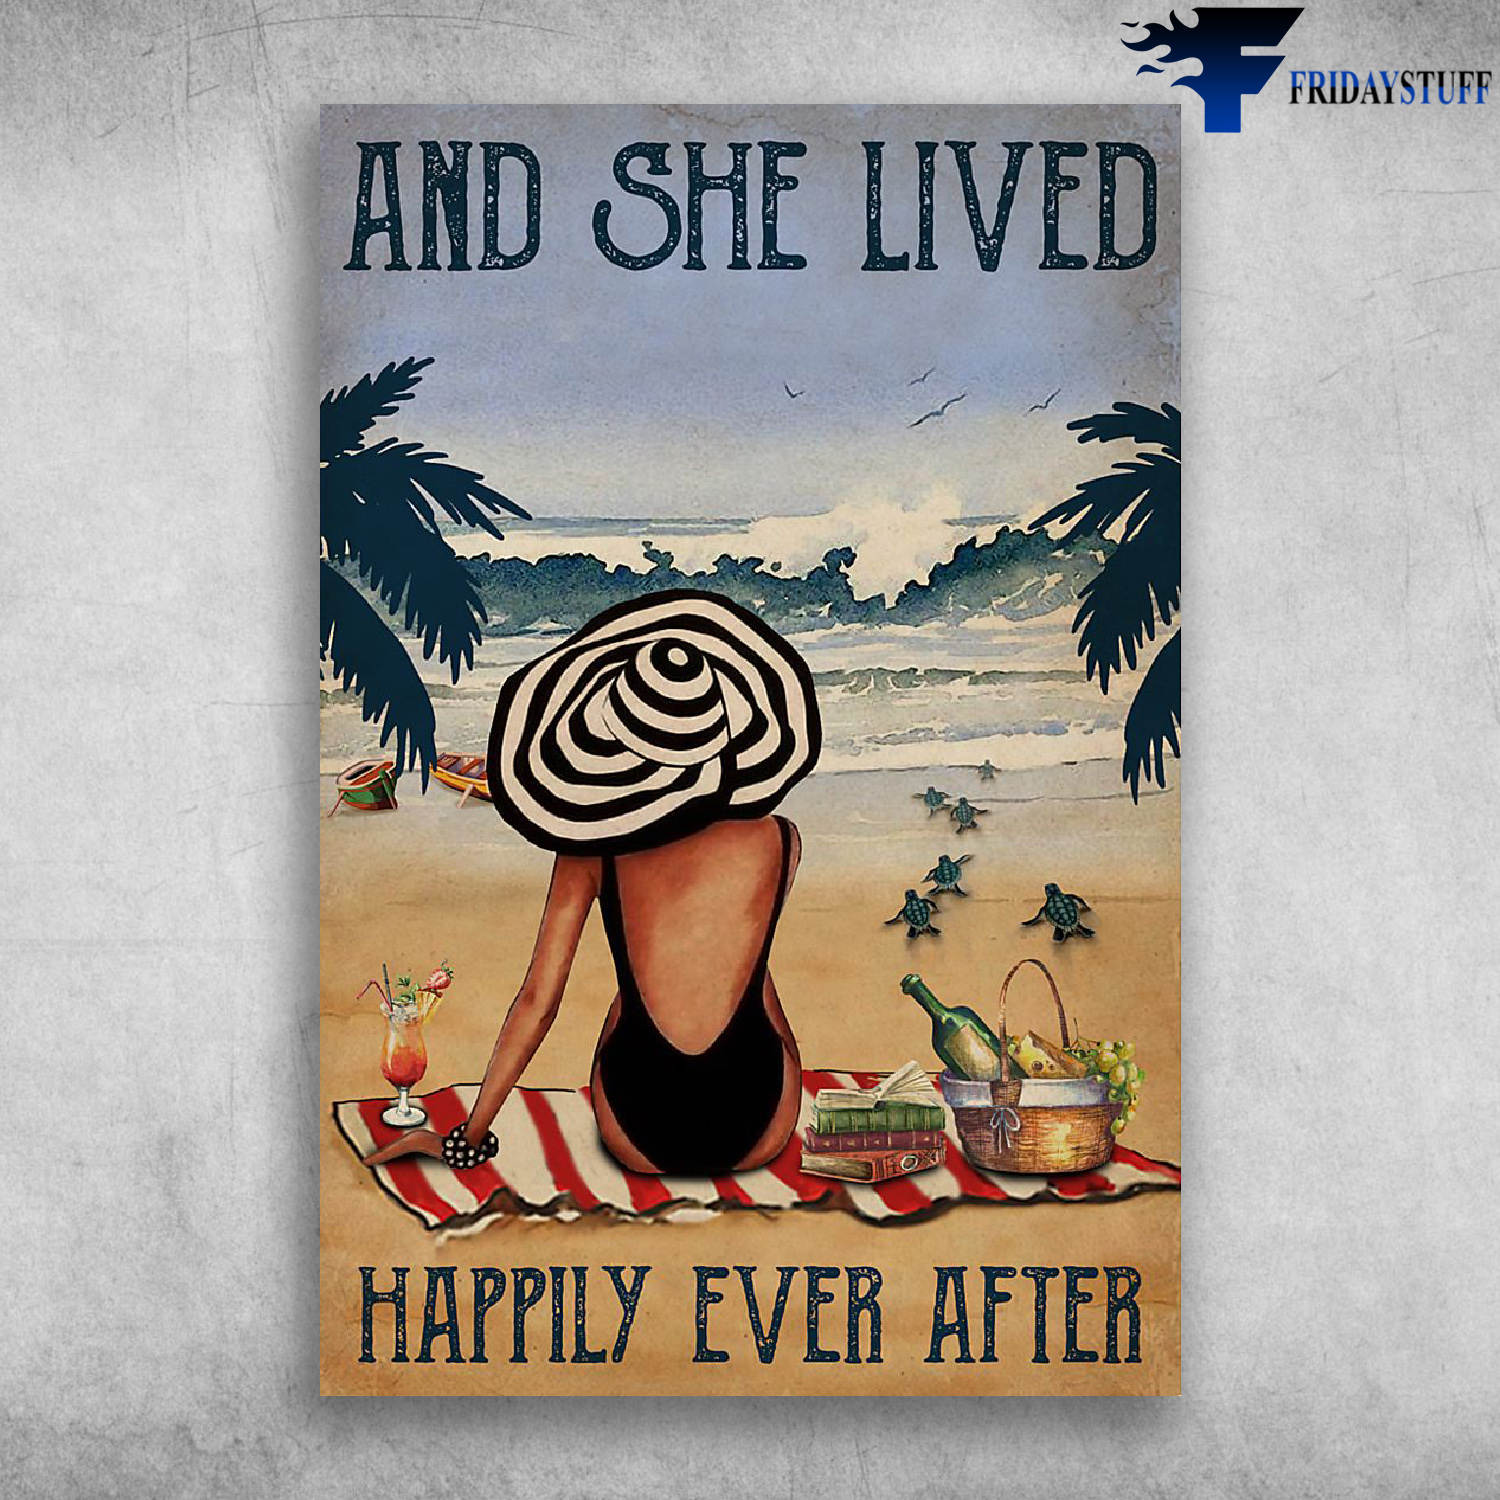 And She Lived Happily Ever After - Girl And Beach, Wine, Book